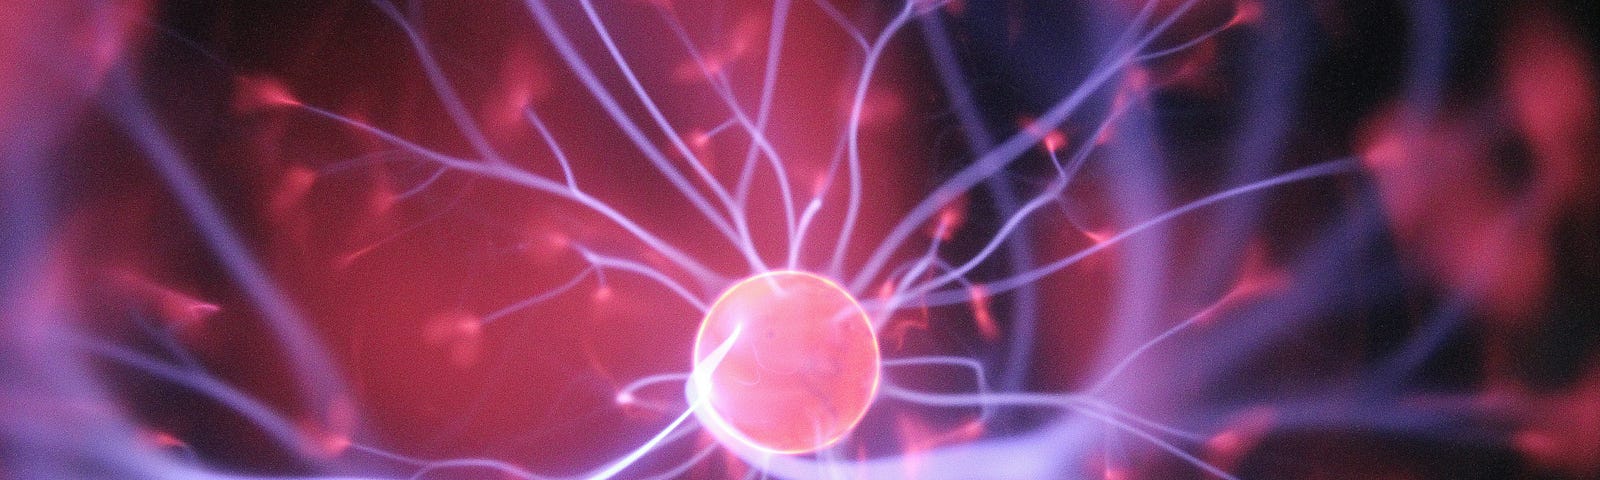 Simulated pink brain cell against pink and black background.